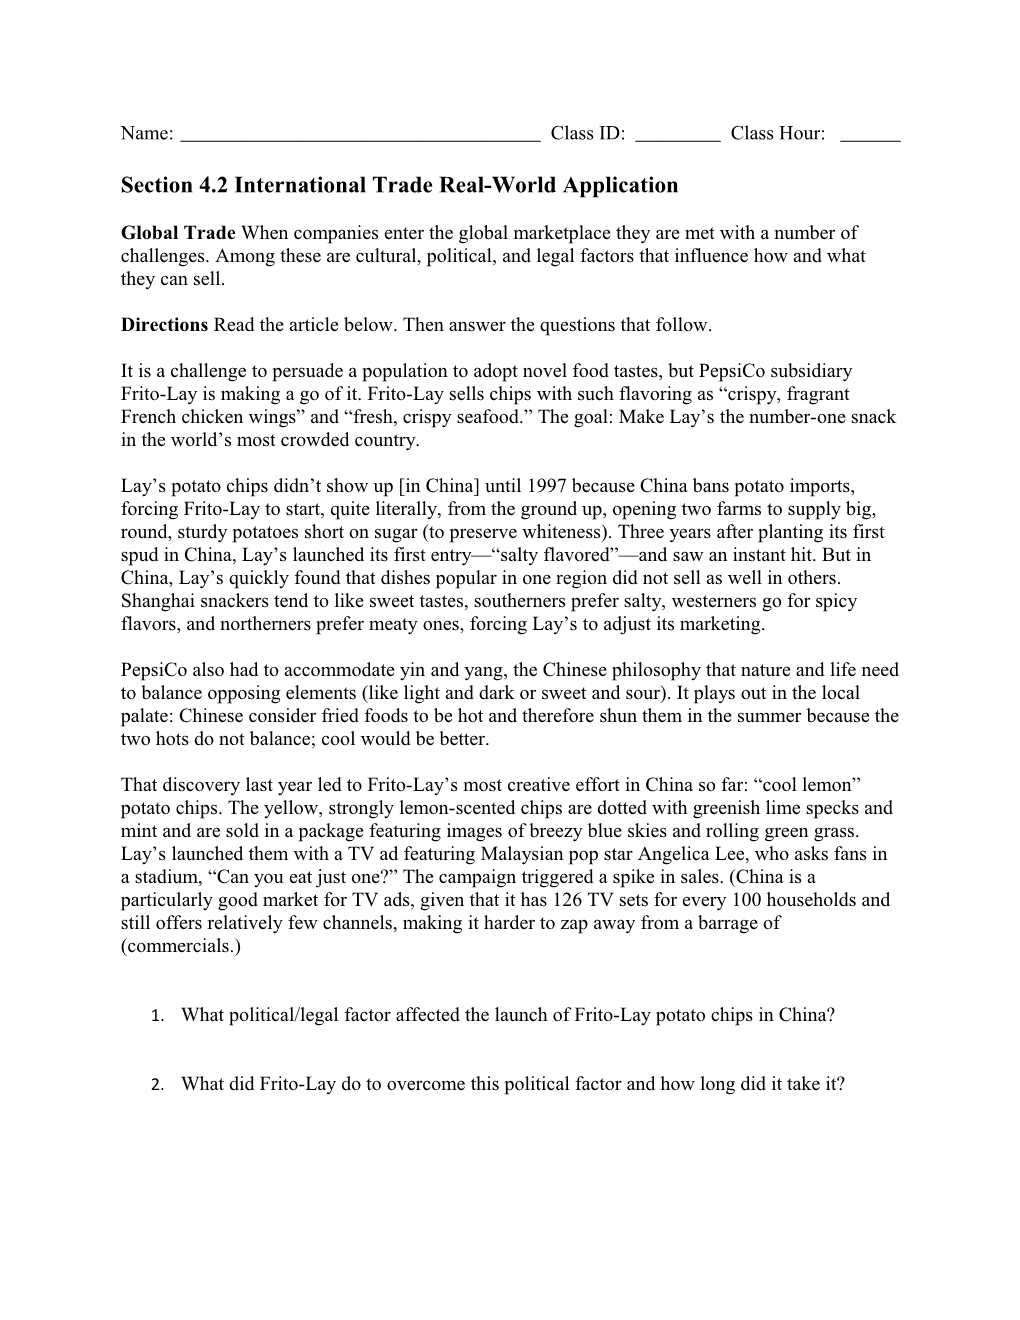 Section 4.2 International Trade Real-World Application